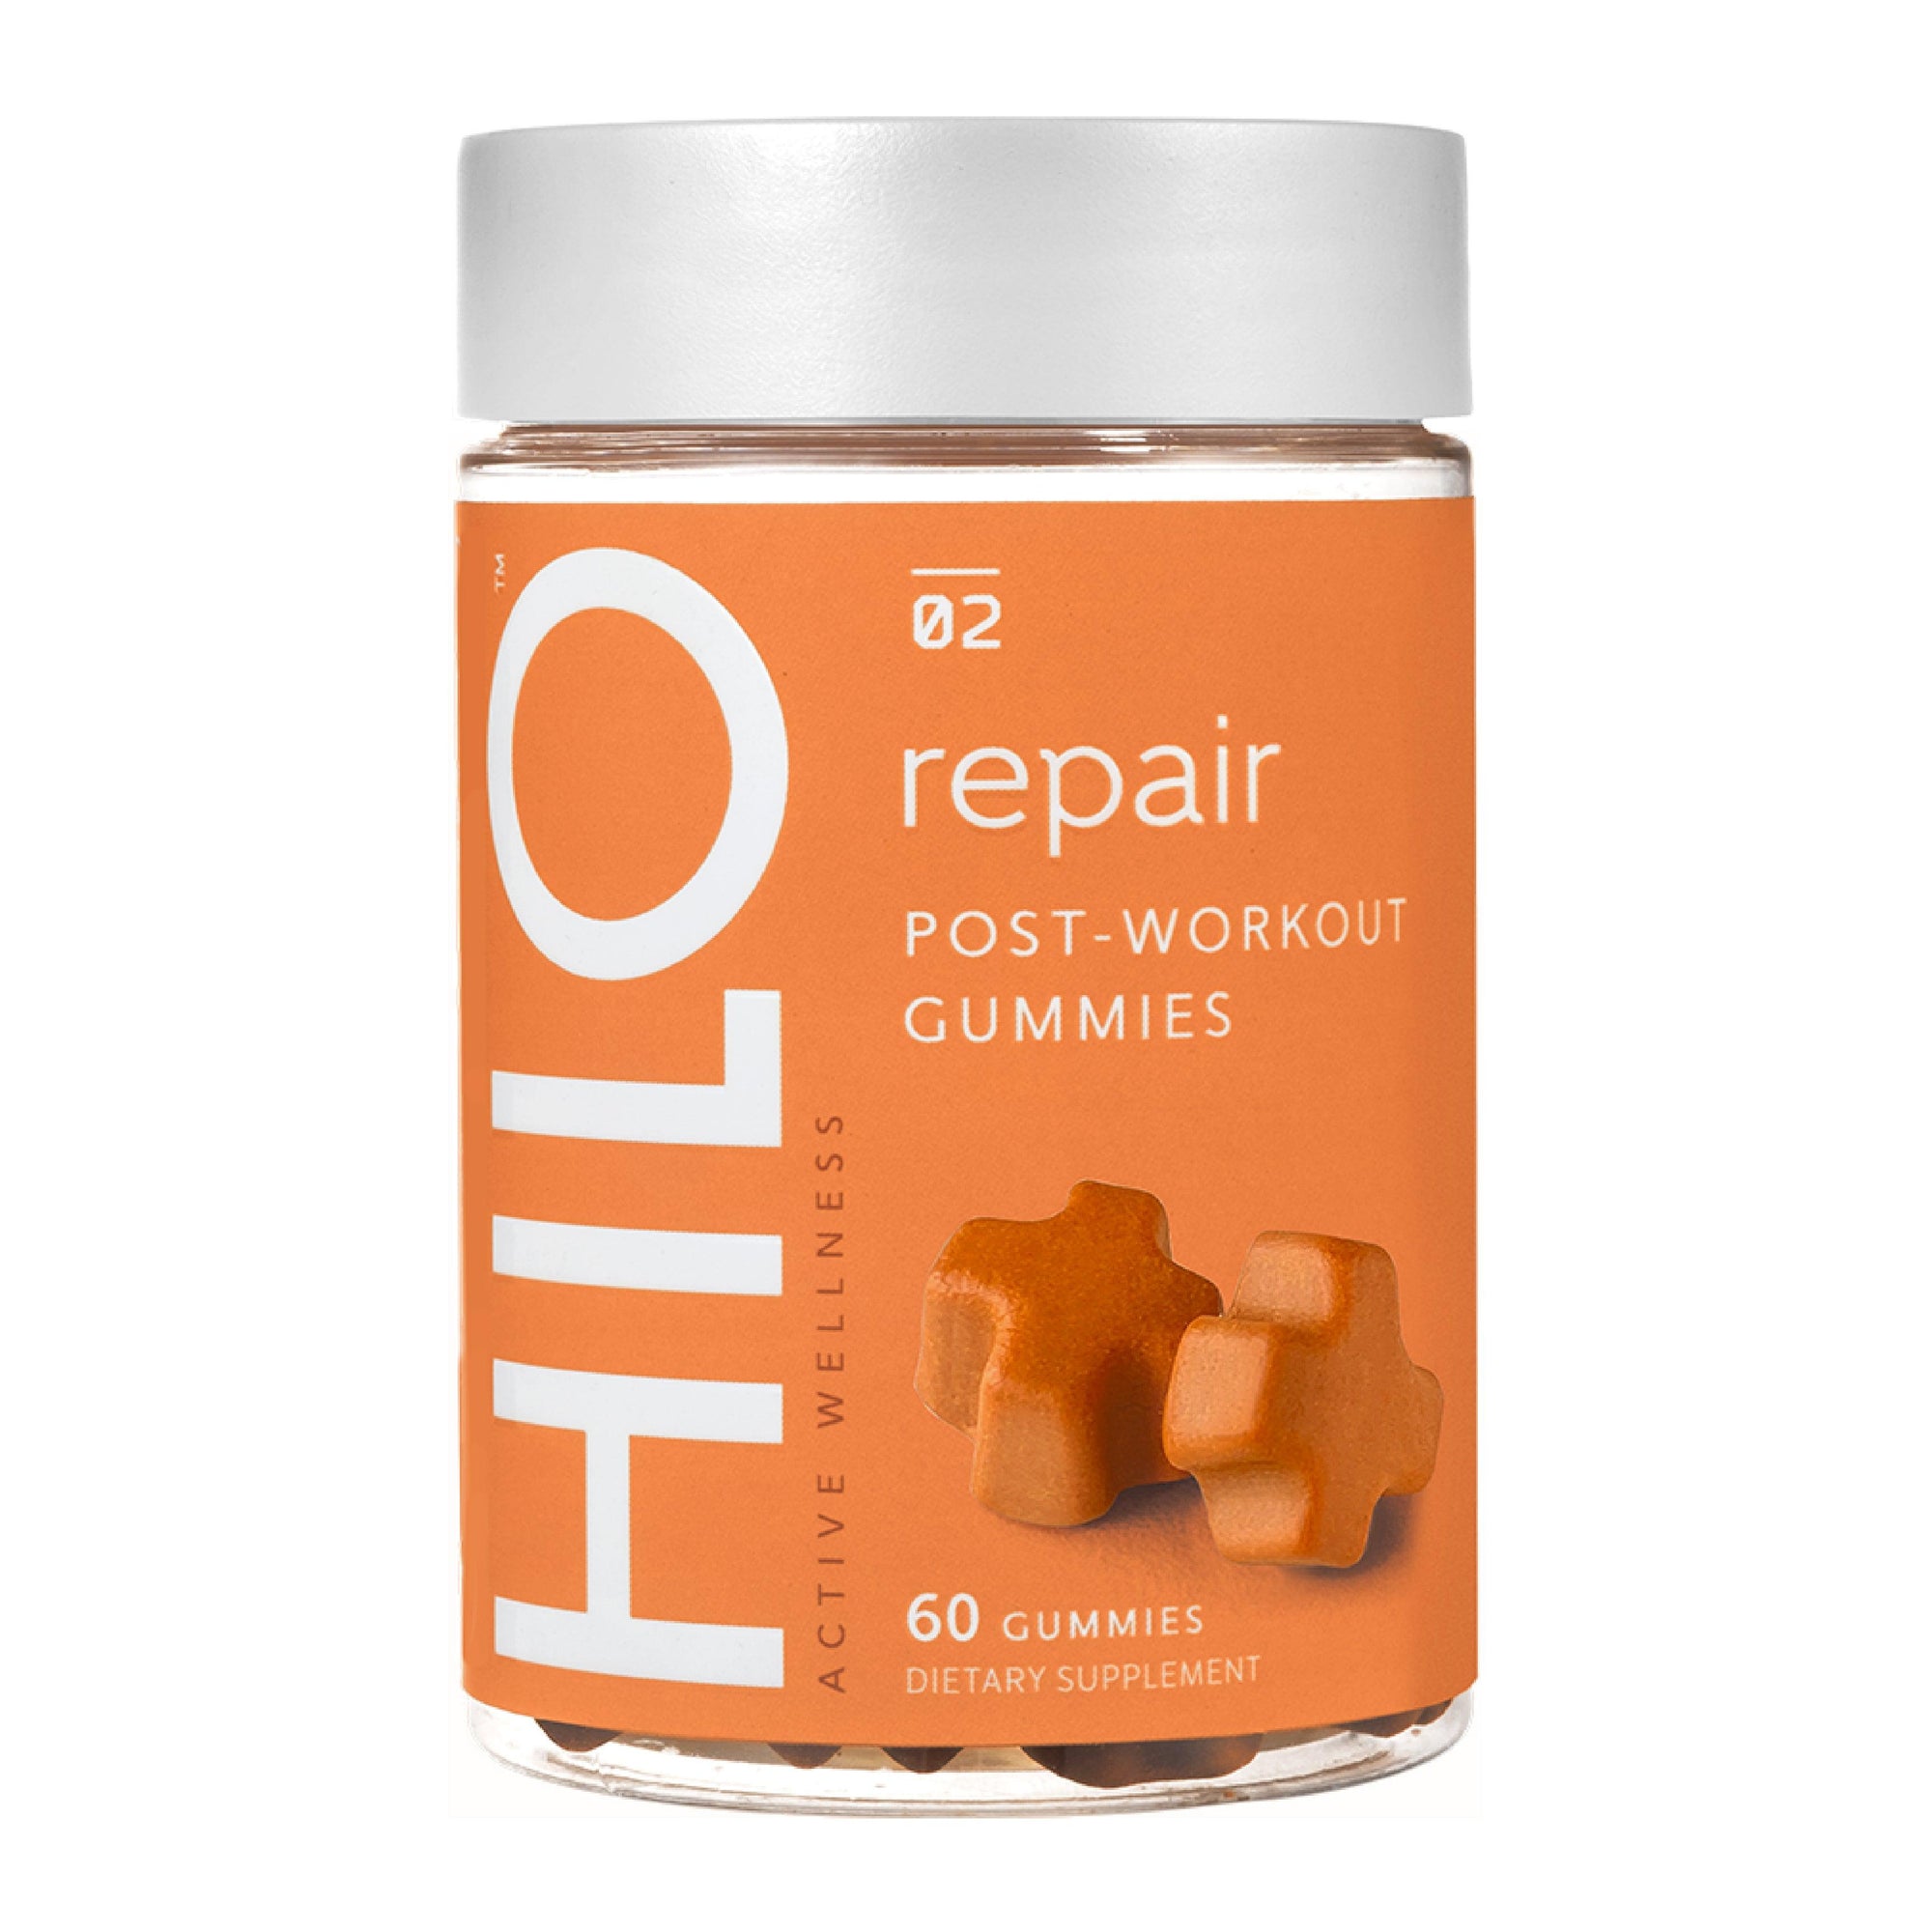 MUSCLE RECOVERY & REPAIR GUMMIES - Hilo Nutrition